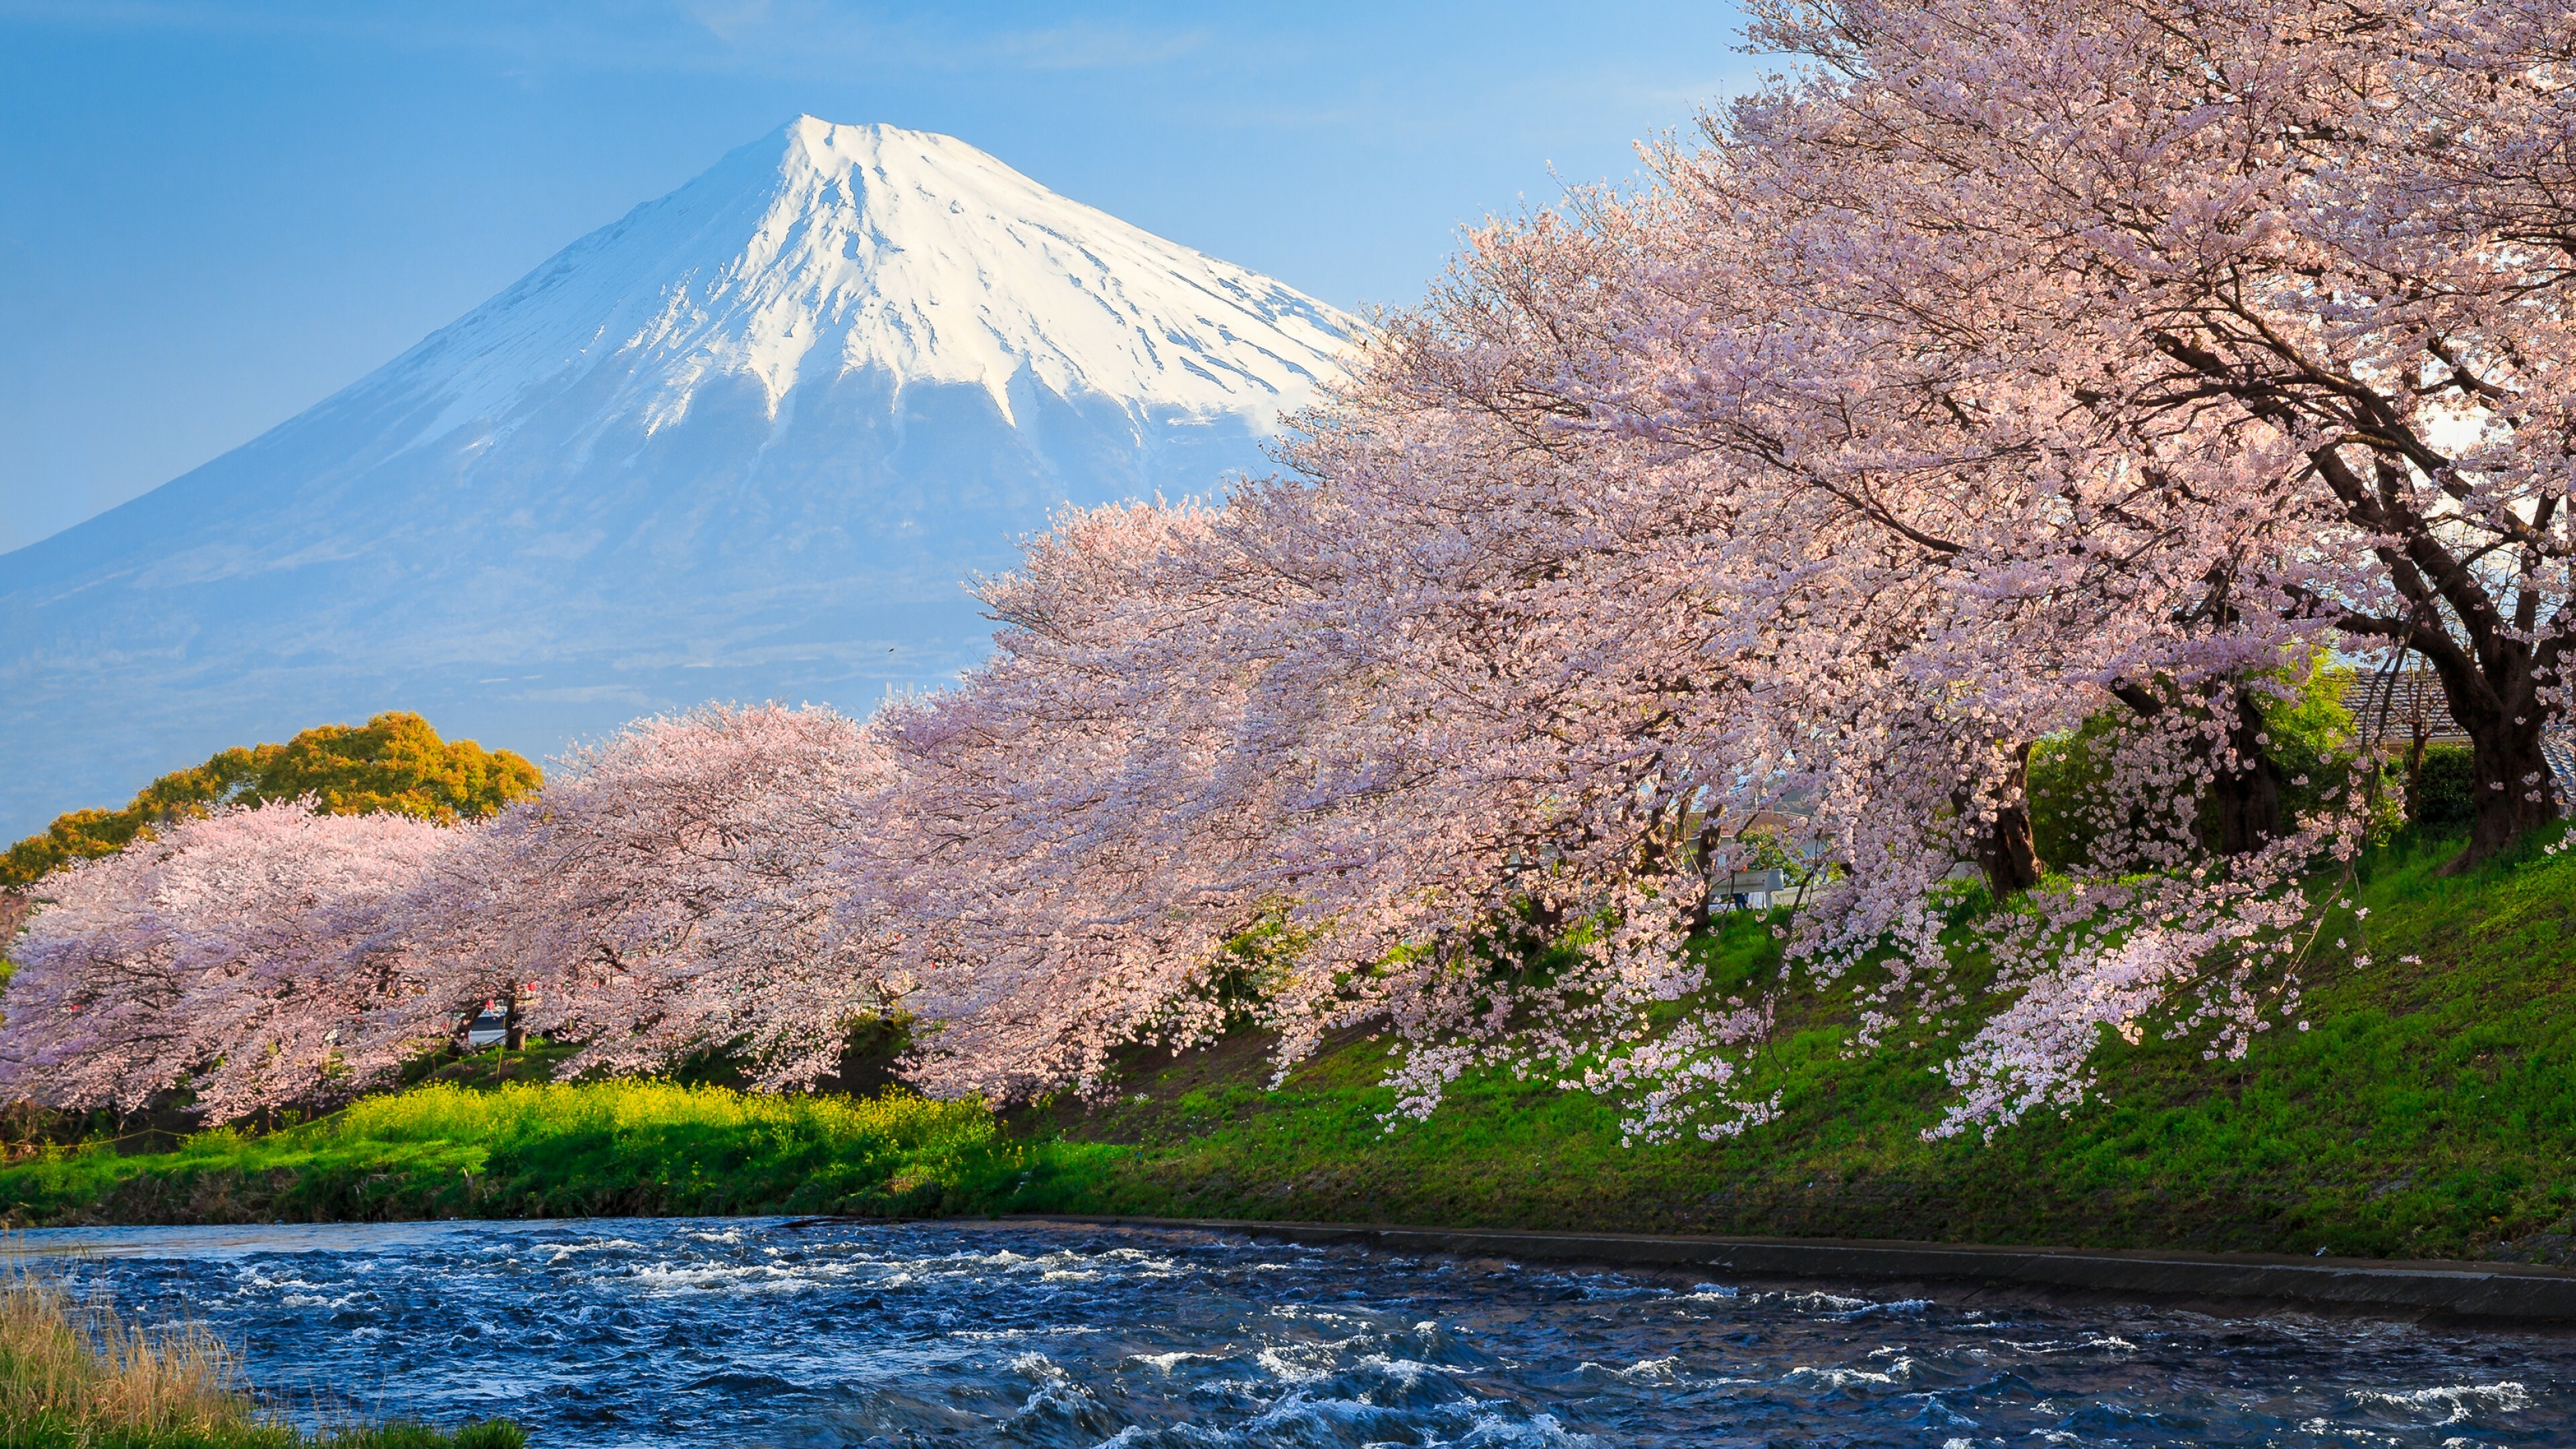 Japan: Mount Fuji, Sakura flowers, The country surrendered in 1945 after two atomic bombings. 3840x2160 4K Background.